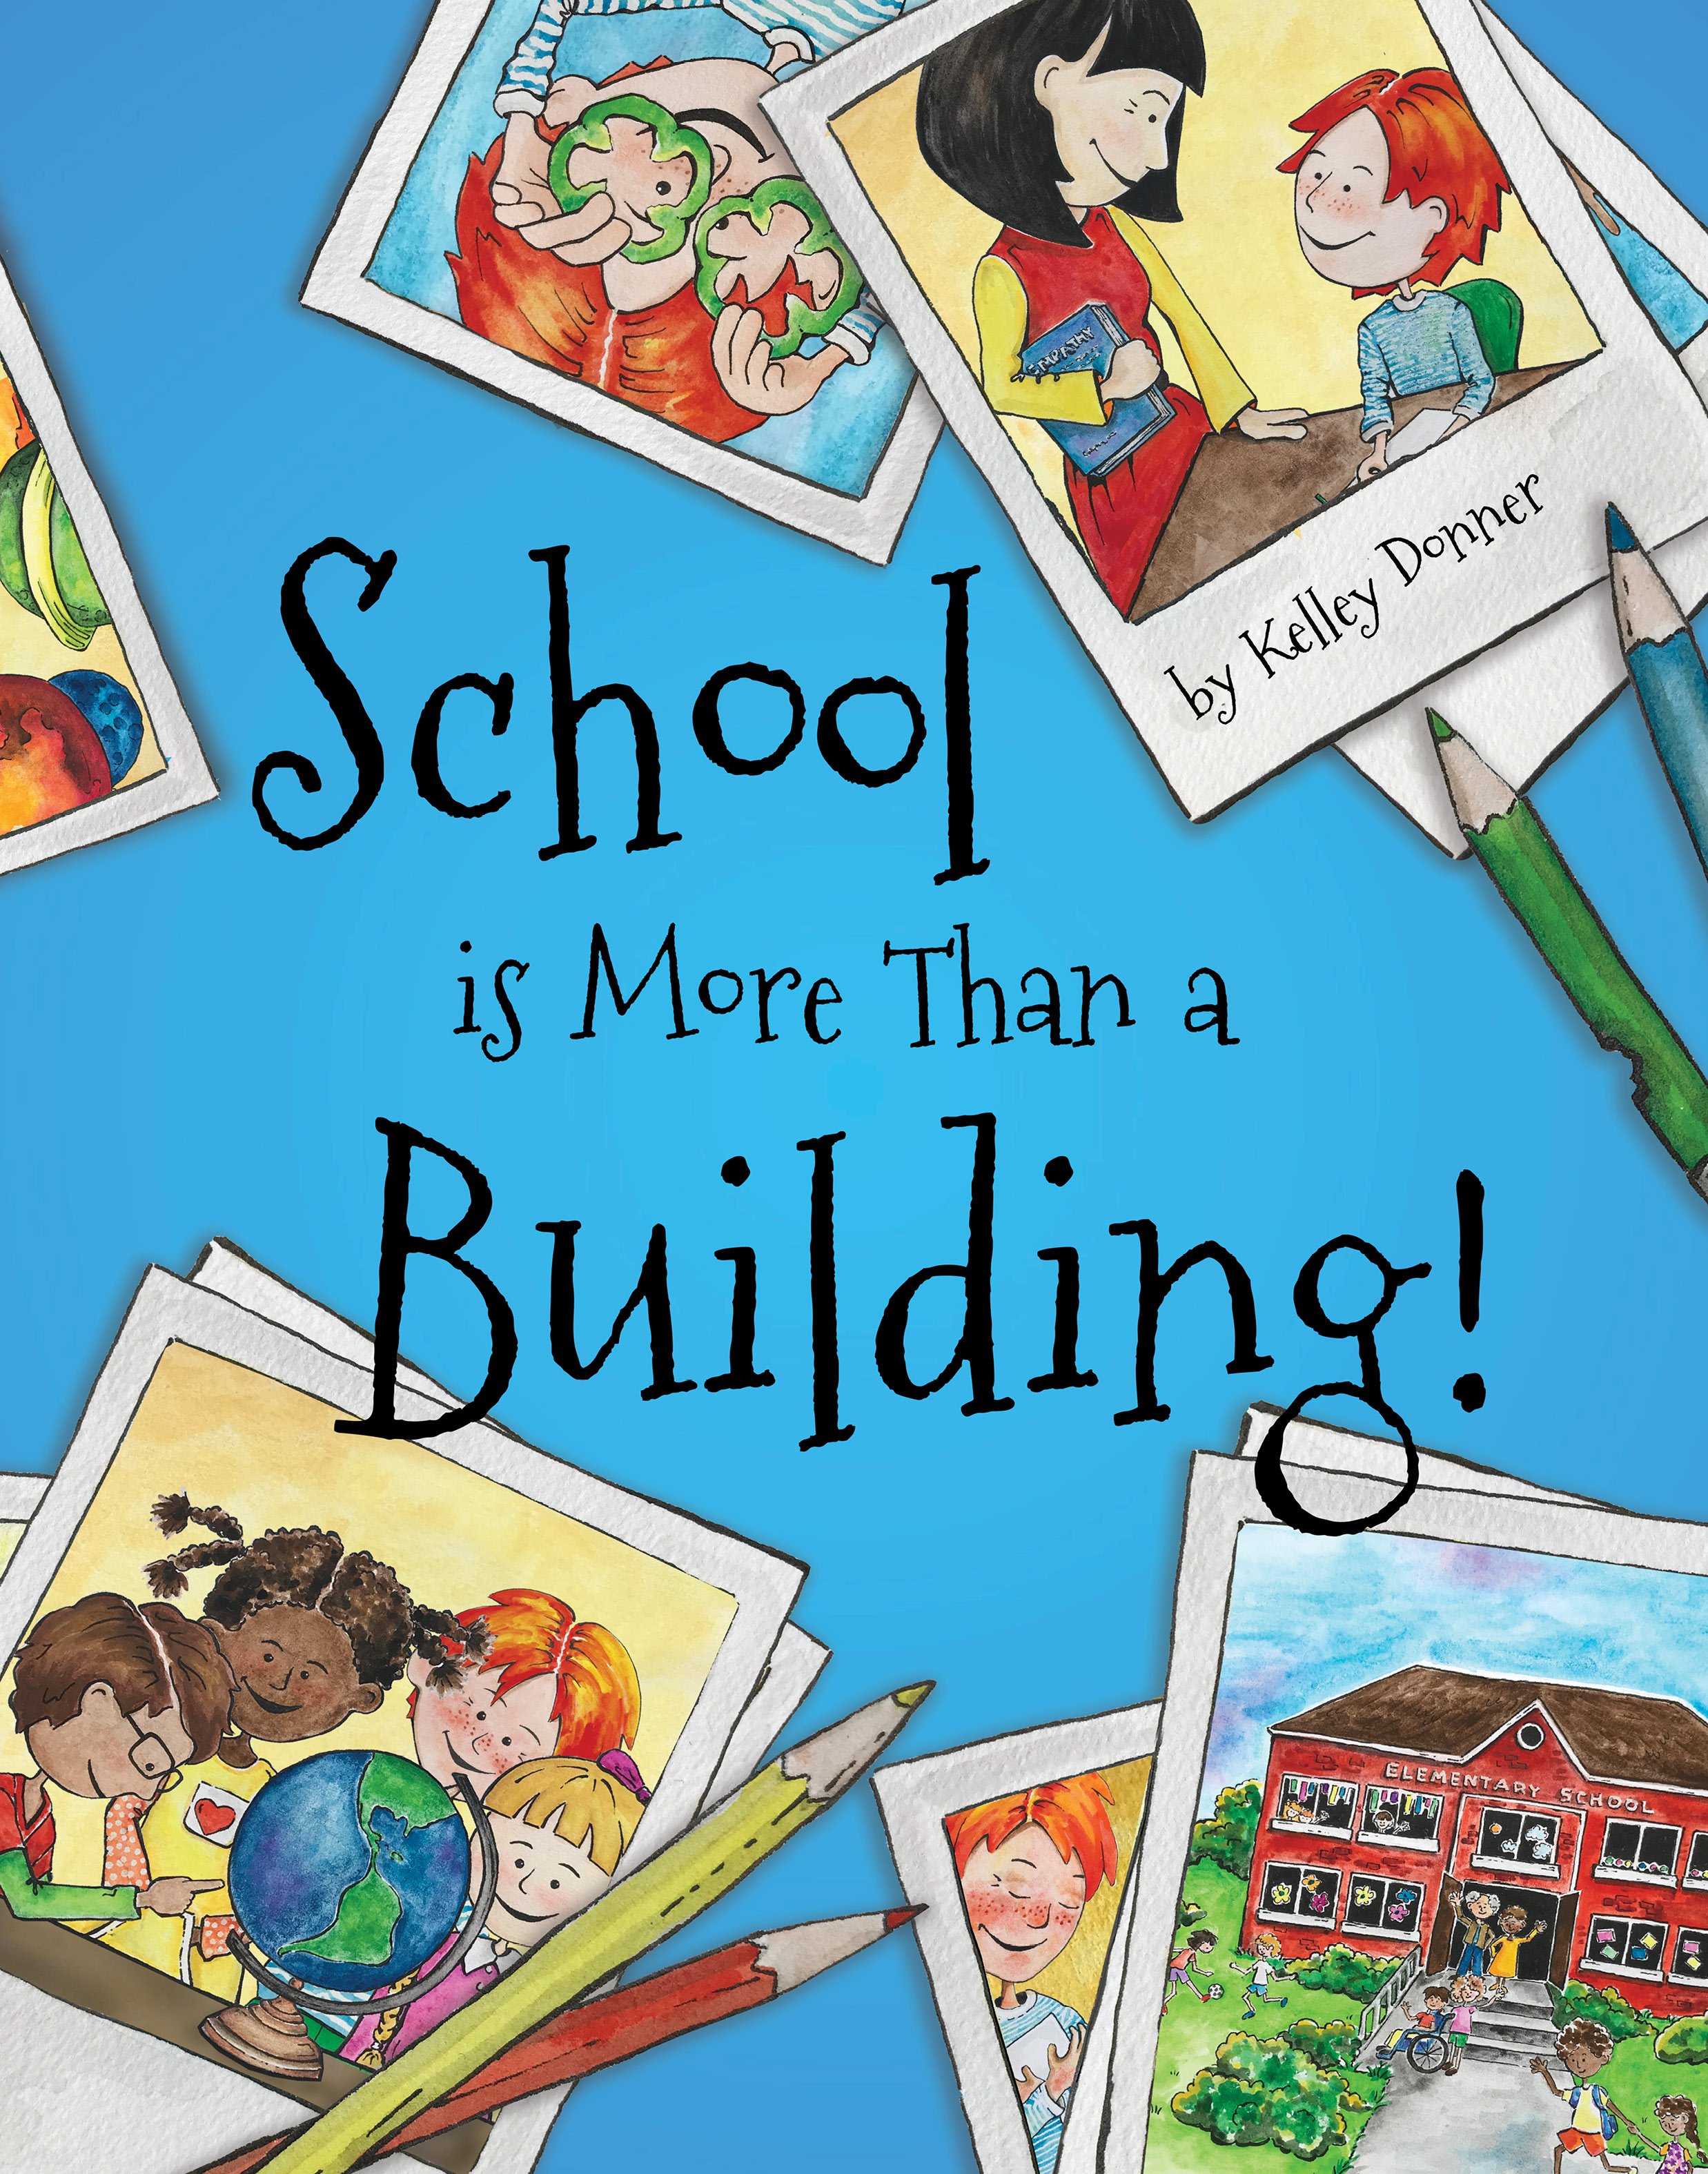 School is More Than a Building